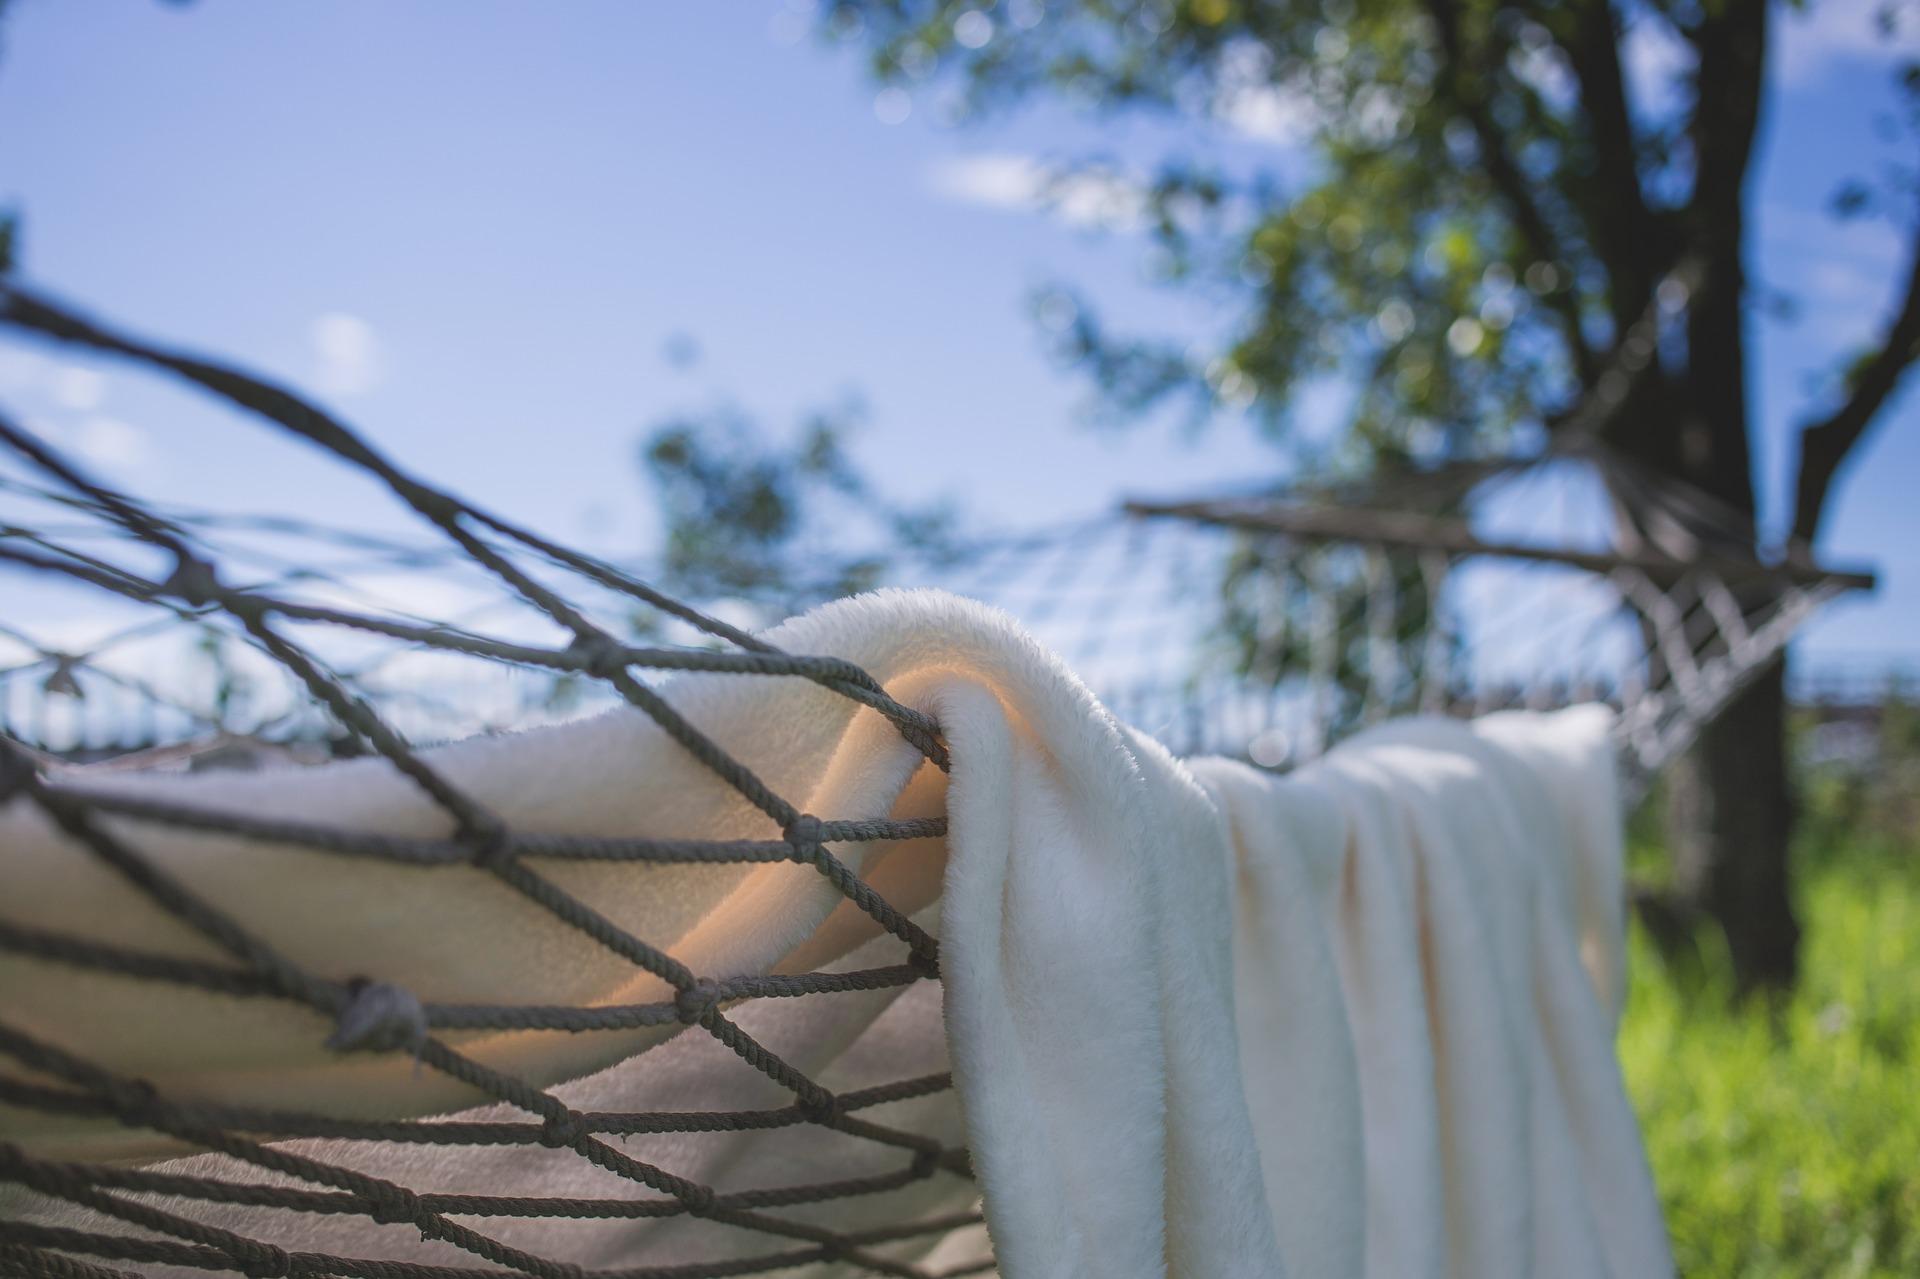 Nowadays, some claim that hammocks are even better than beds! Here is a list of reasons why.